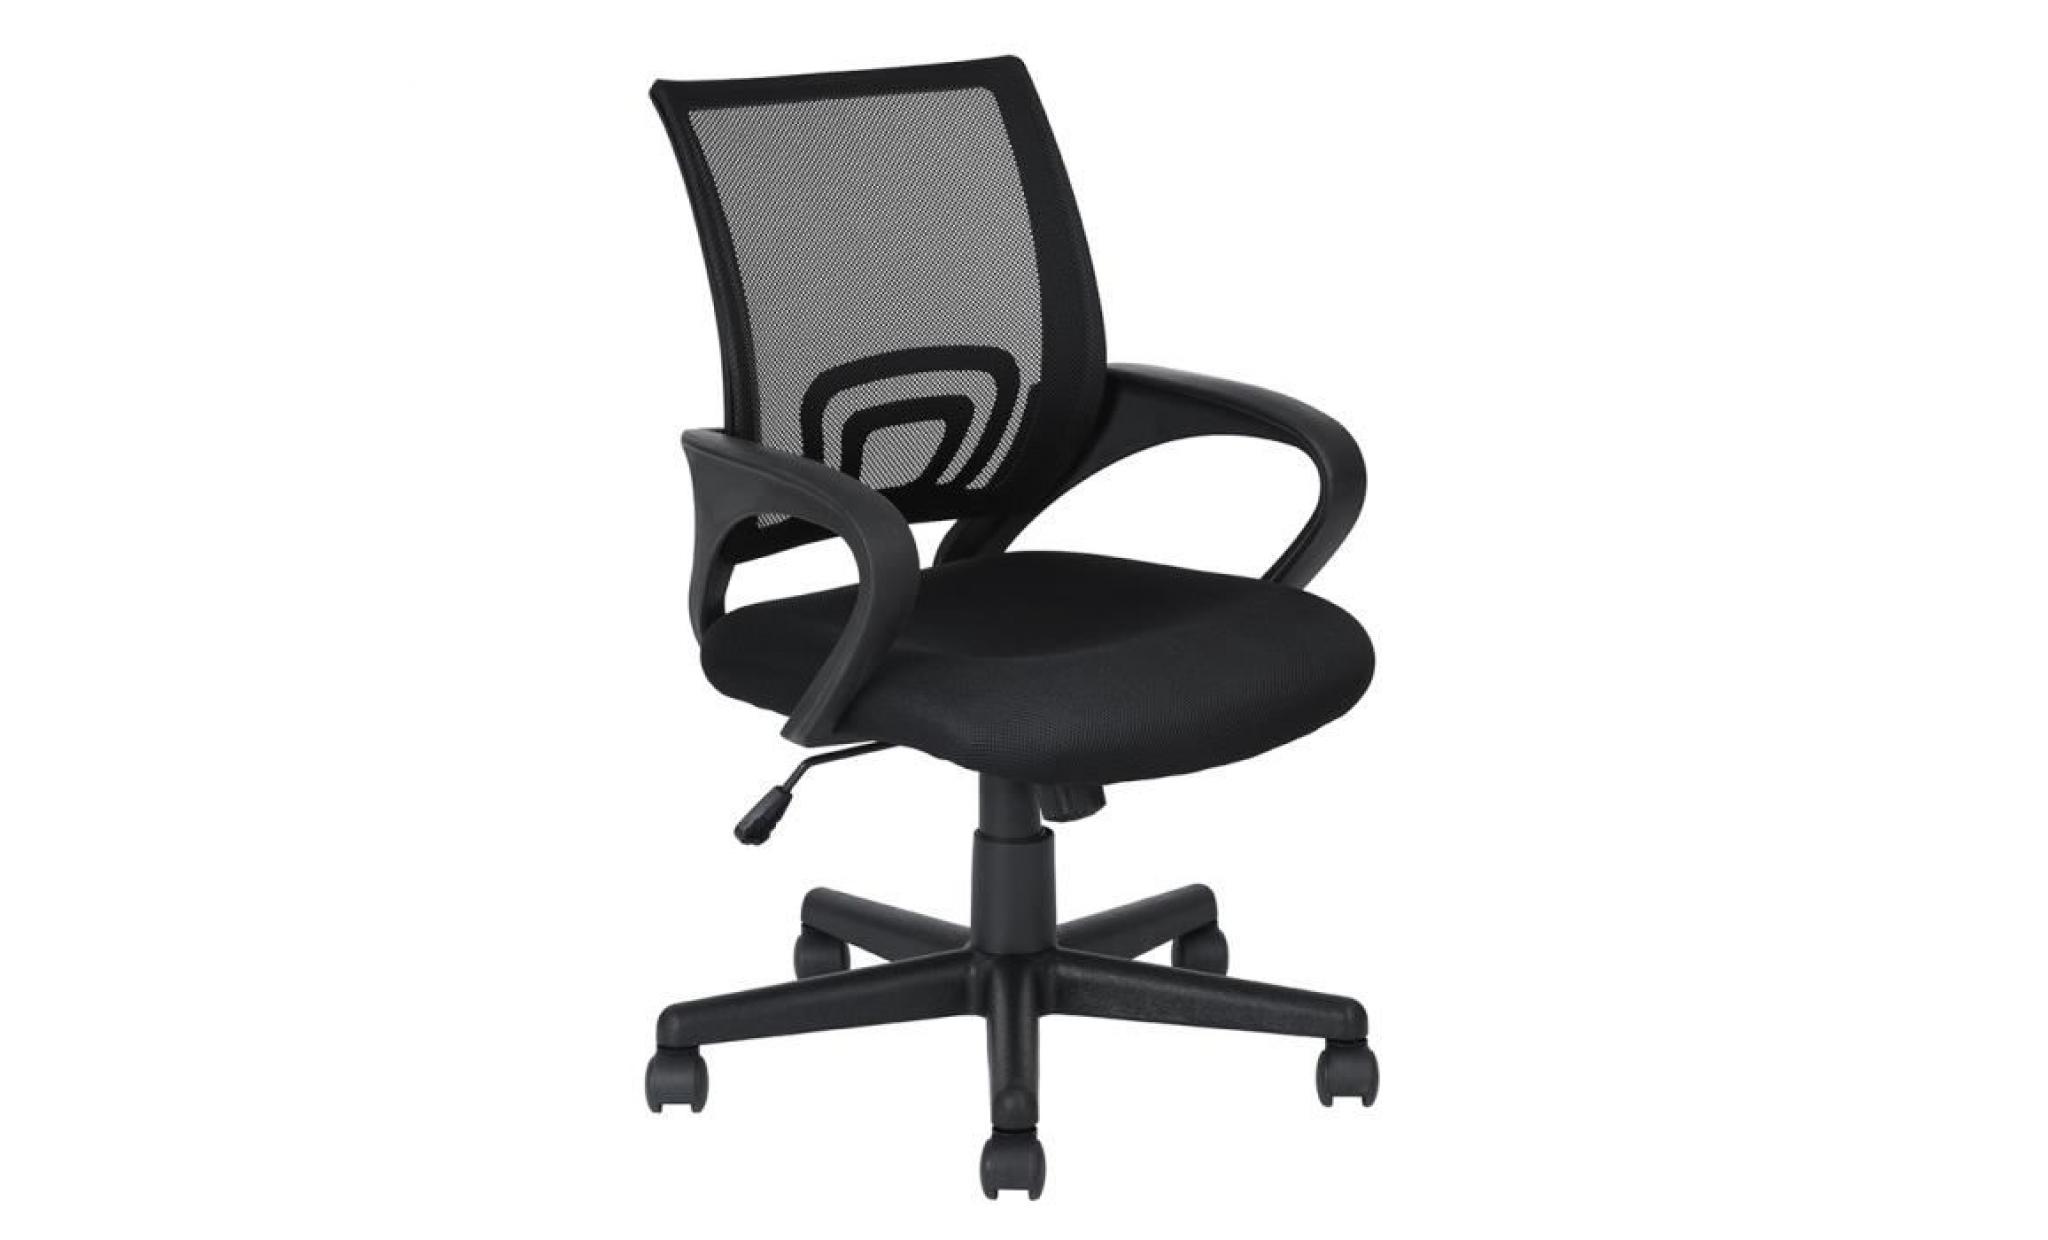 furnish 1 office chair, swivel 360 degrees, armrests and adjustable middle height backrest, 5 casters,noir